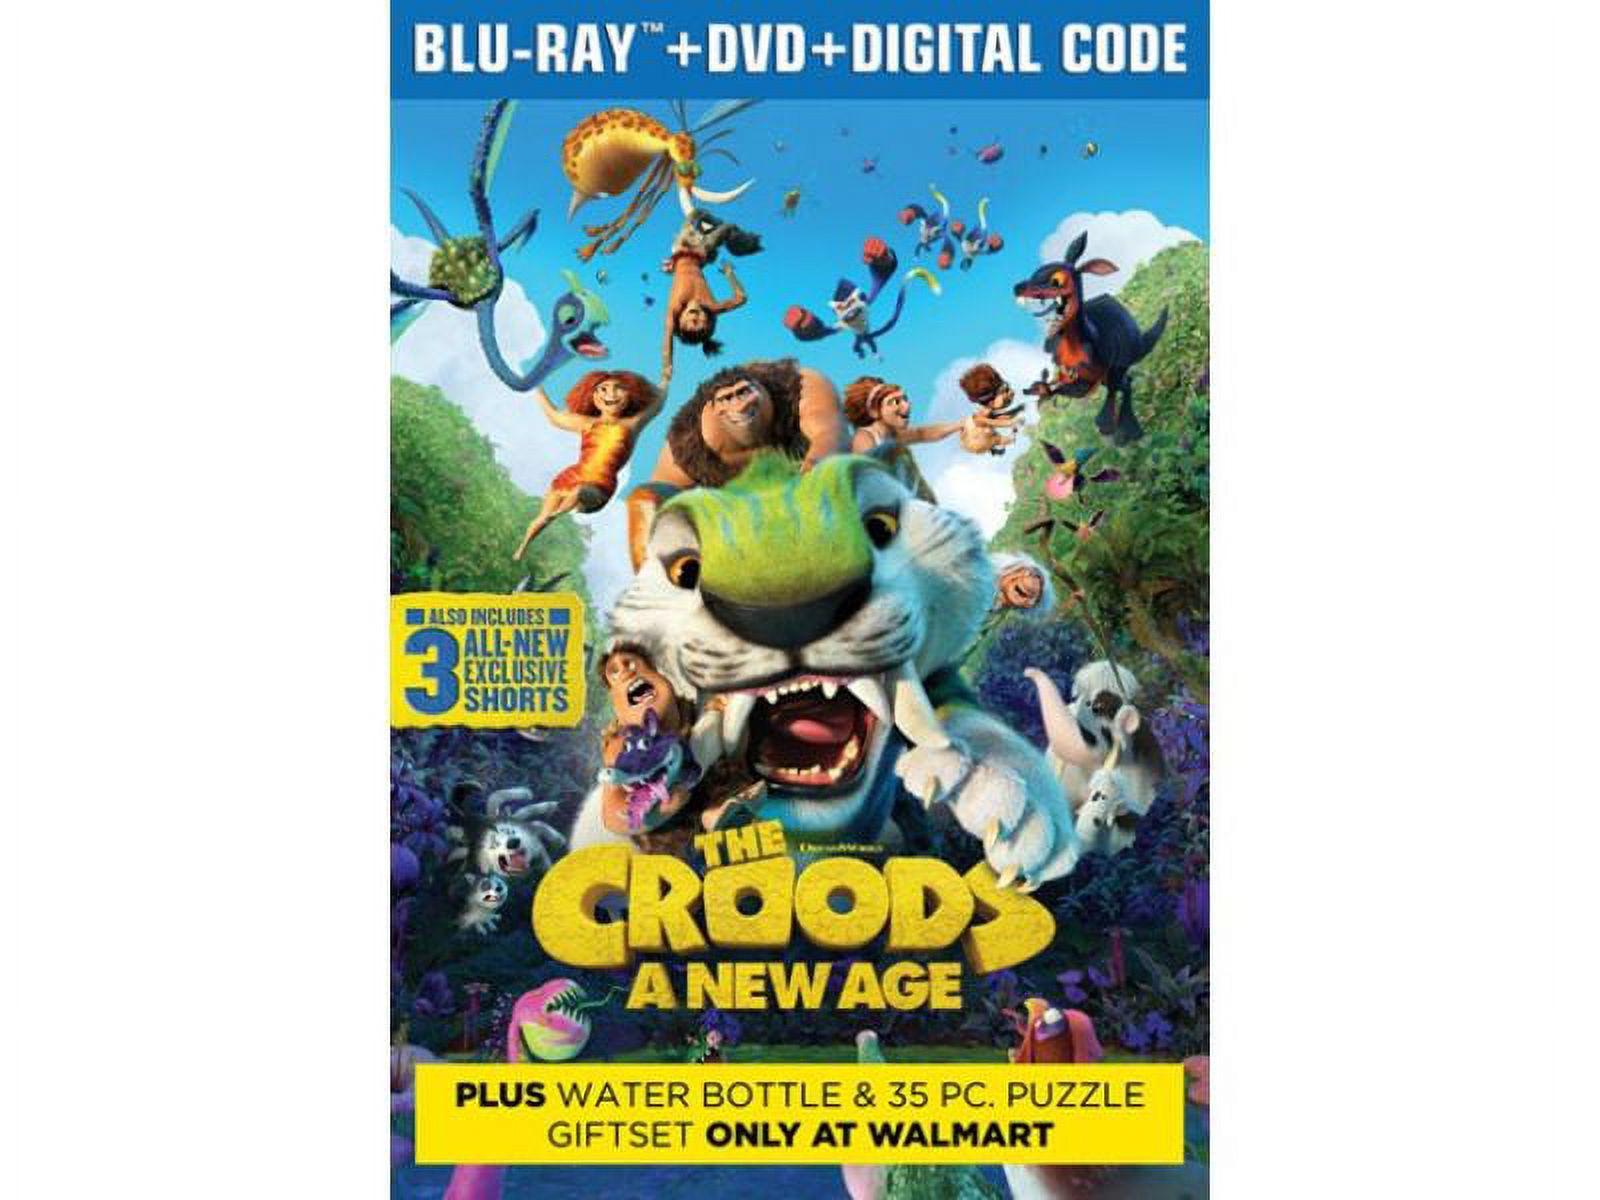 The Croods: A New Age (Walmart Exclusive) (Blu-ray + DVD + Digital Copy) (Walmart Exclusive) - image 2 of 2